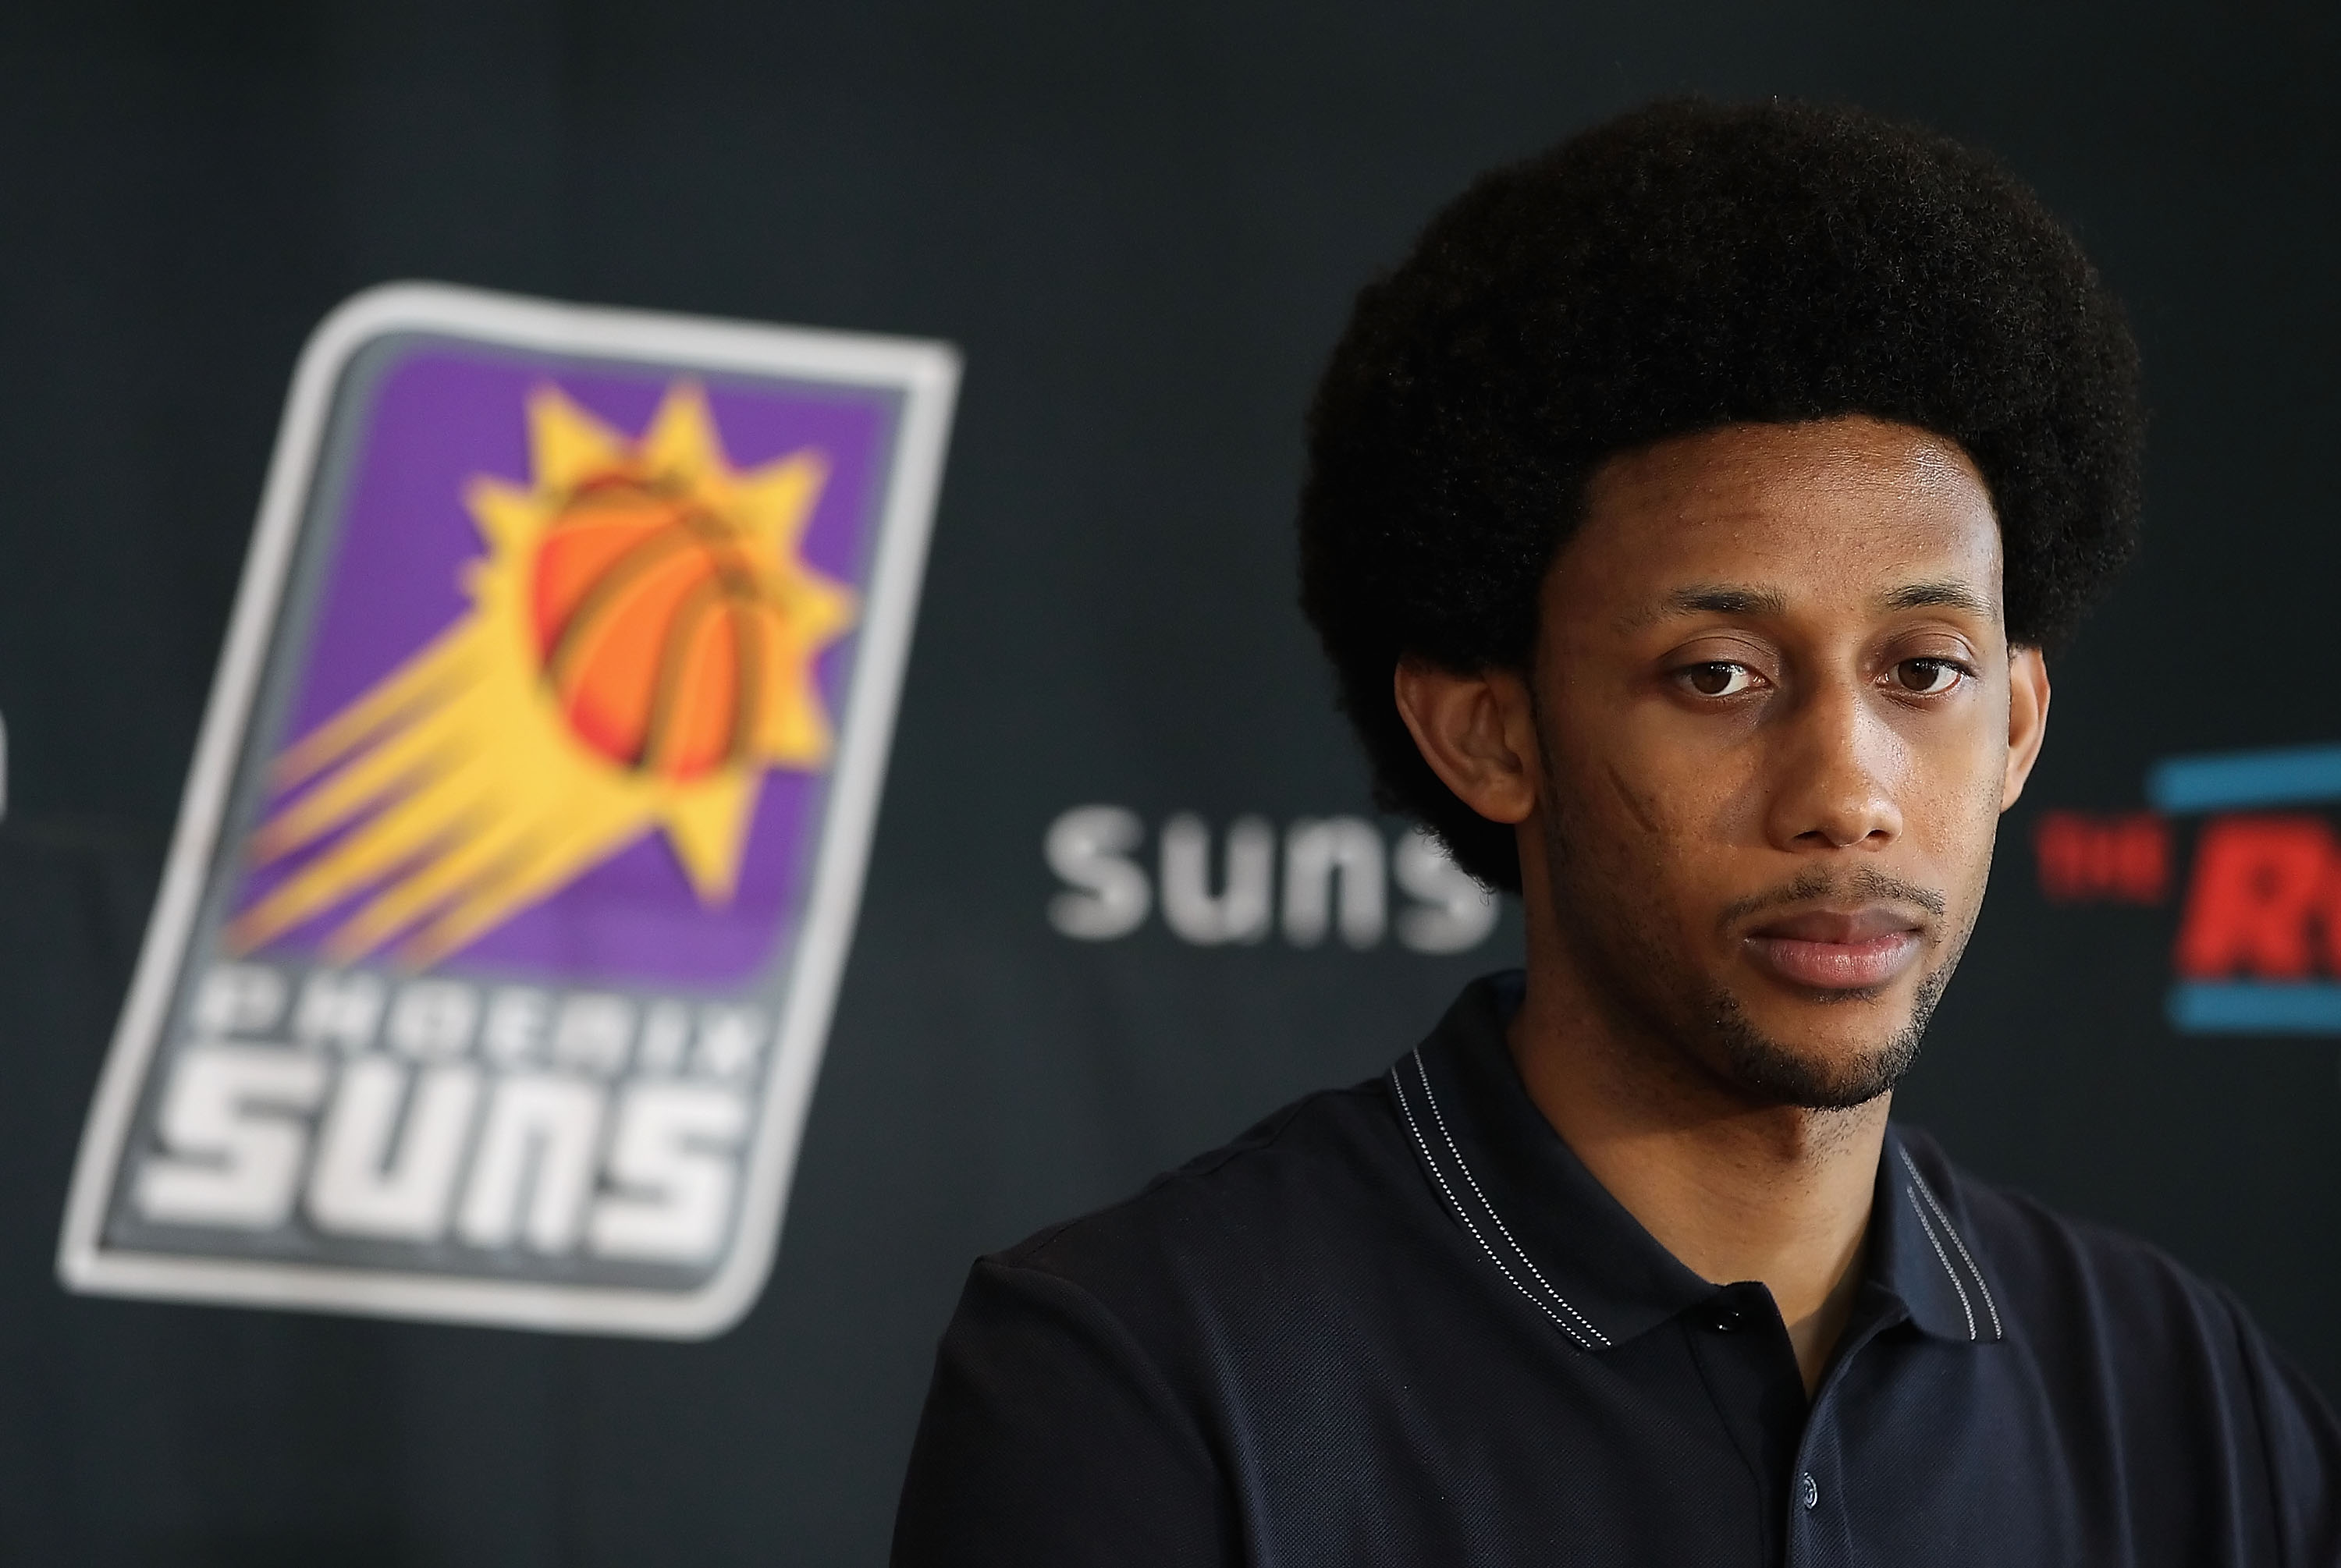 PHOENIX - JULY 14:  Josh Childress of the Phoenix Suns speaks during a press conference at US Airways Center on July 14, 2010 in Phoenix, Arizona. NOTE TO USER: User expressly acknowledges and agrees that, by downloading and or using this photograph, User